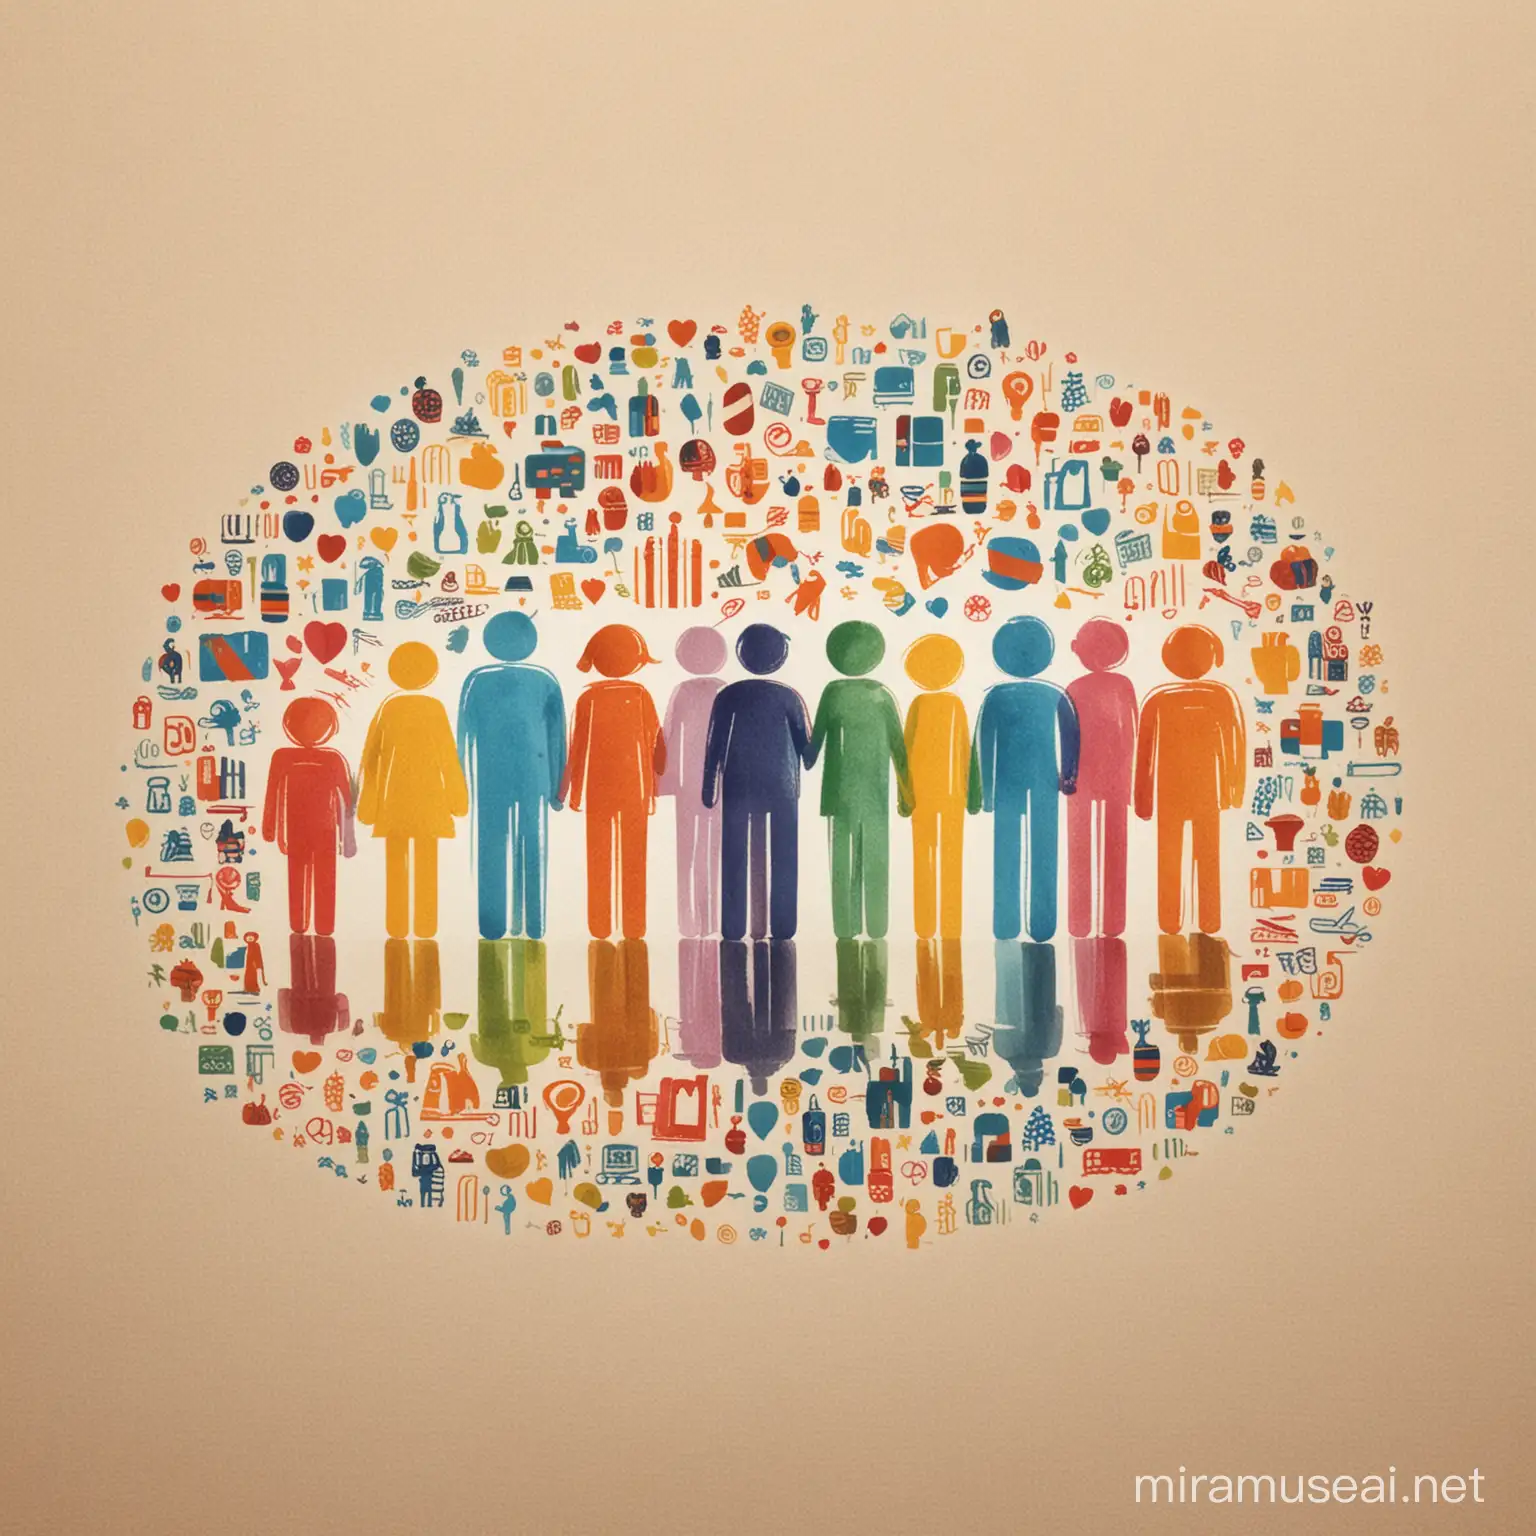 Illustration of Diverse Community Coming Together for Social Cohesion